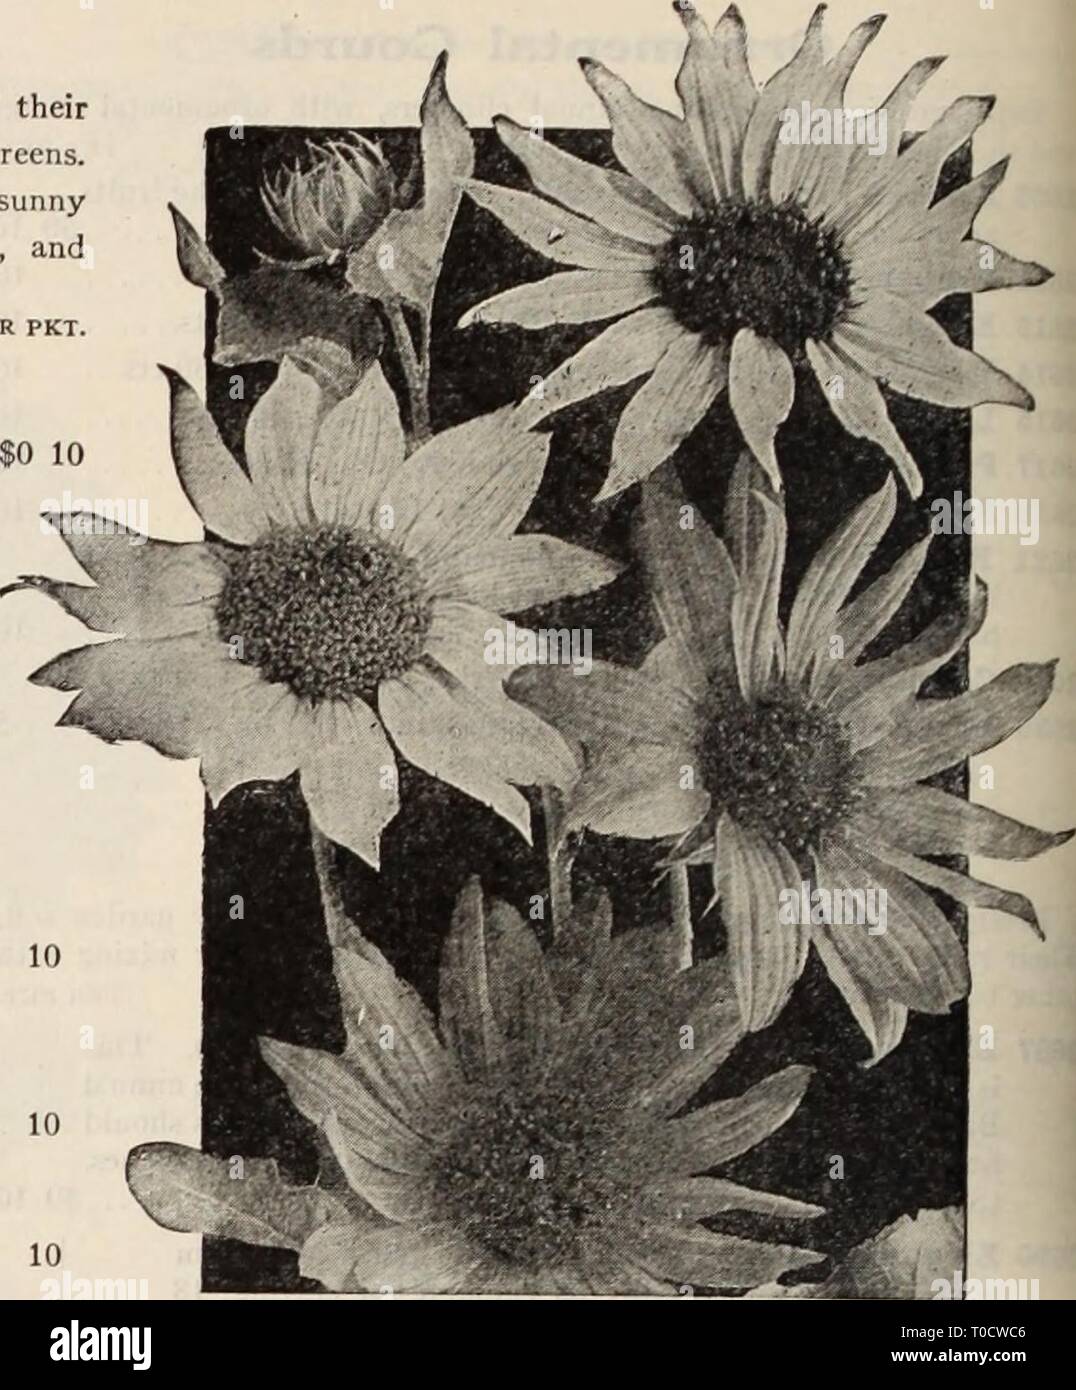 Dreer's garden book  Henry Dreer's garden book / Henry A. Dreer. dreersgardenbook1931dree Year:   RELIABLE FLOWER SEEDS,! Helianthus, Annual Sunflowers Remarkable for the stately growth, size and brilliancy of their flowers, making a very good effect among shrubbery and for screens. The annual sorts are indispensable for cutting. Sown in a sunny spot in April or May they come into bloom early in summer, and keep up a constant supply of flowers until cut down by frost. PER PKT. 2696 Cucumerifolius (Miniature Sunflower). Small, single, rich yellow flowers. An abundant bloomer; 4 feet. J oz., 25  Stock Photo